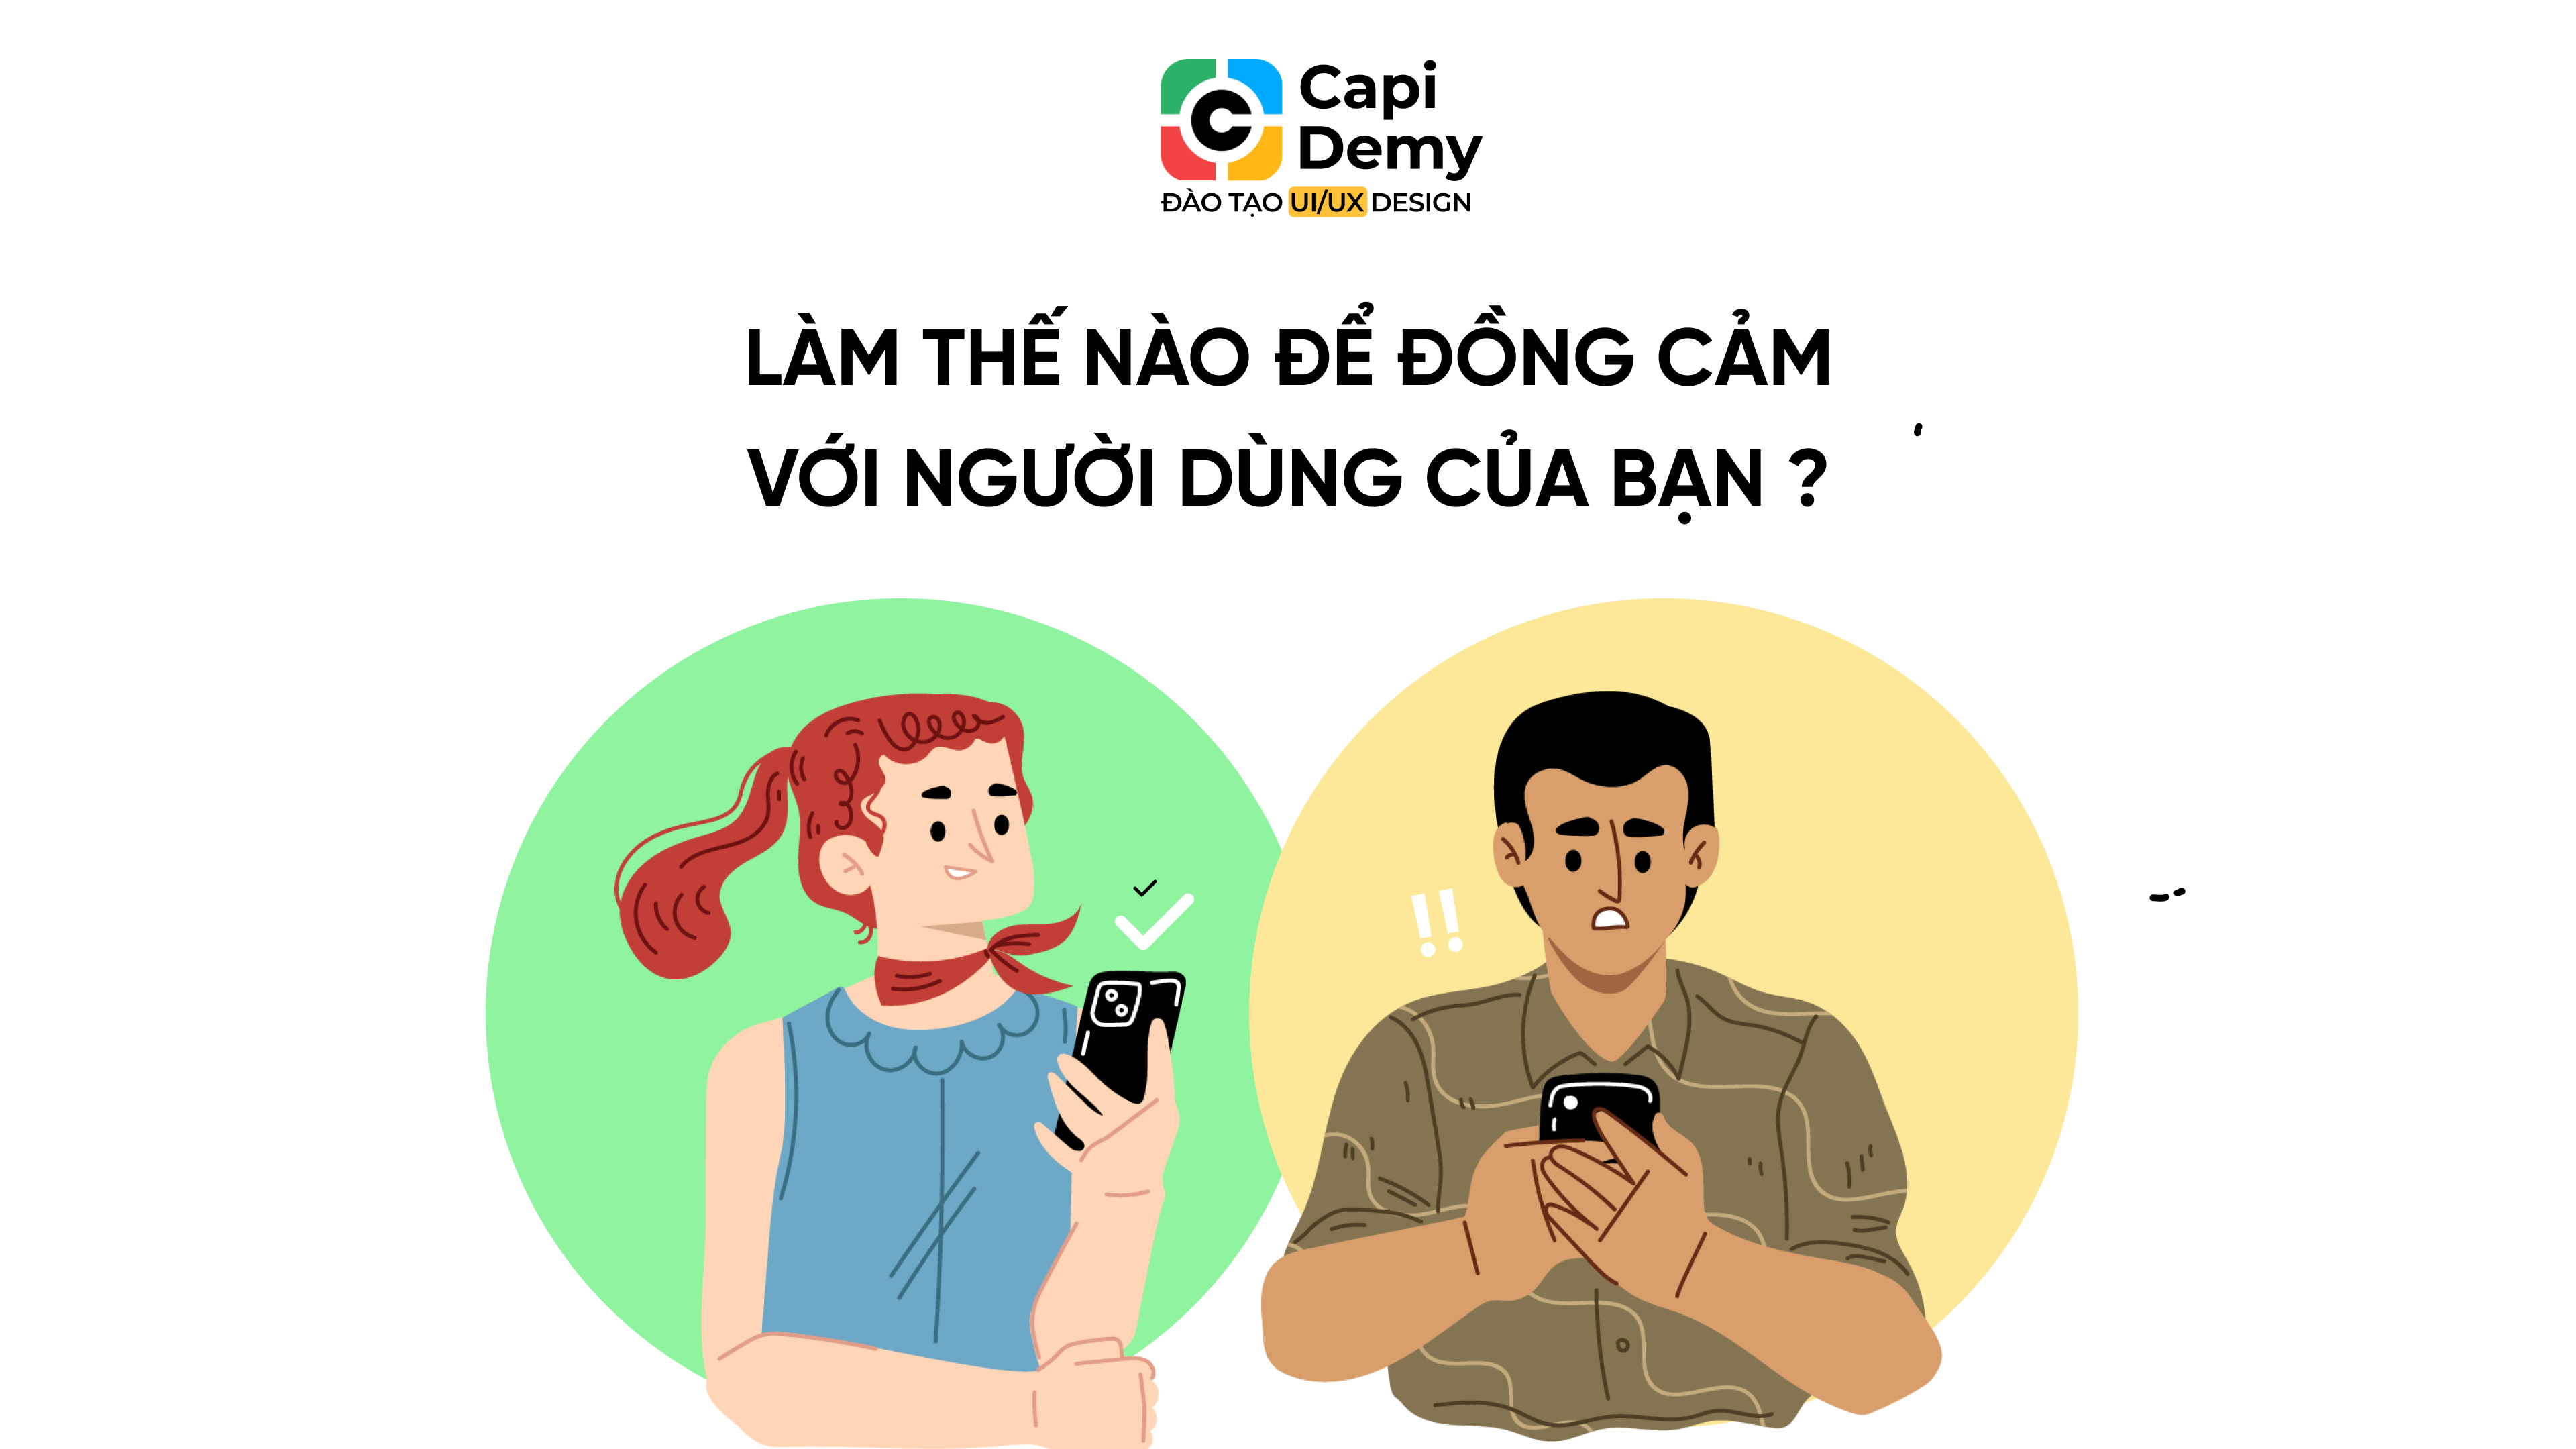 dong-cam-voi-nguoi-dung